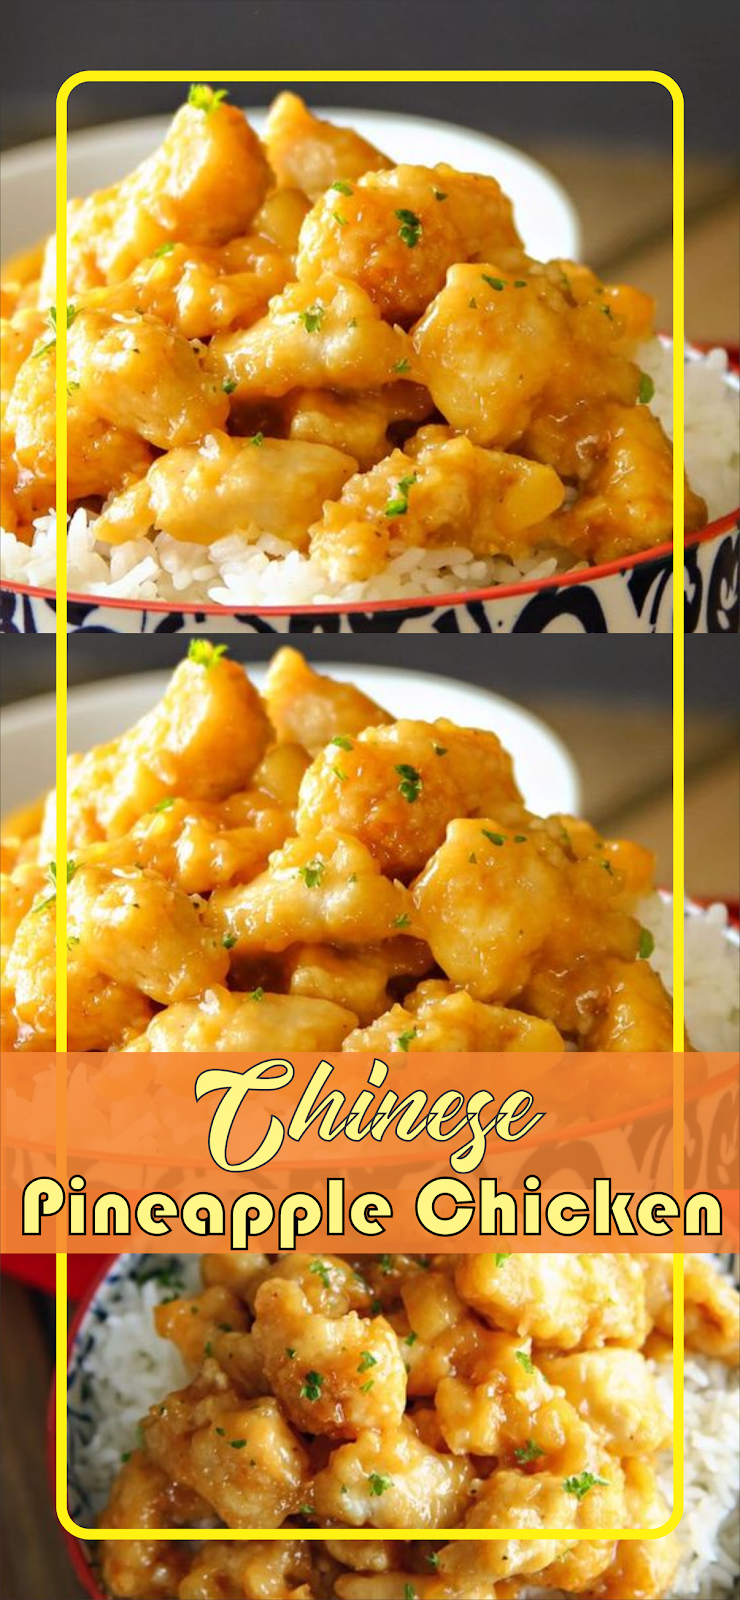 Chinese Pineapple Chicken | Floats CO